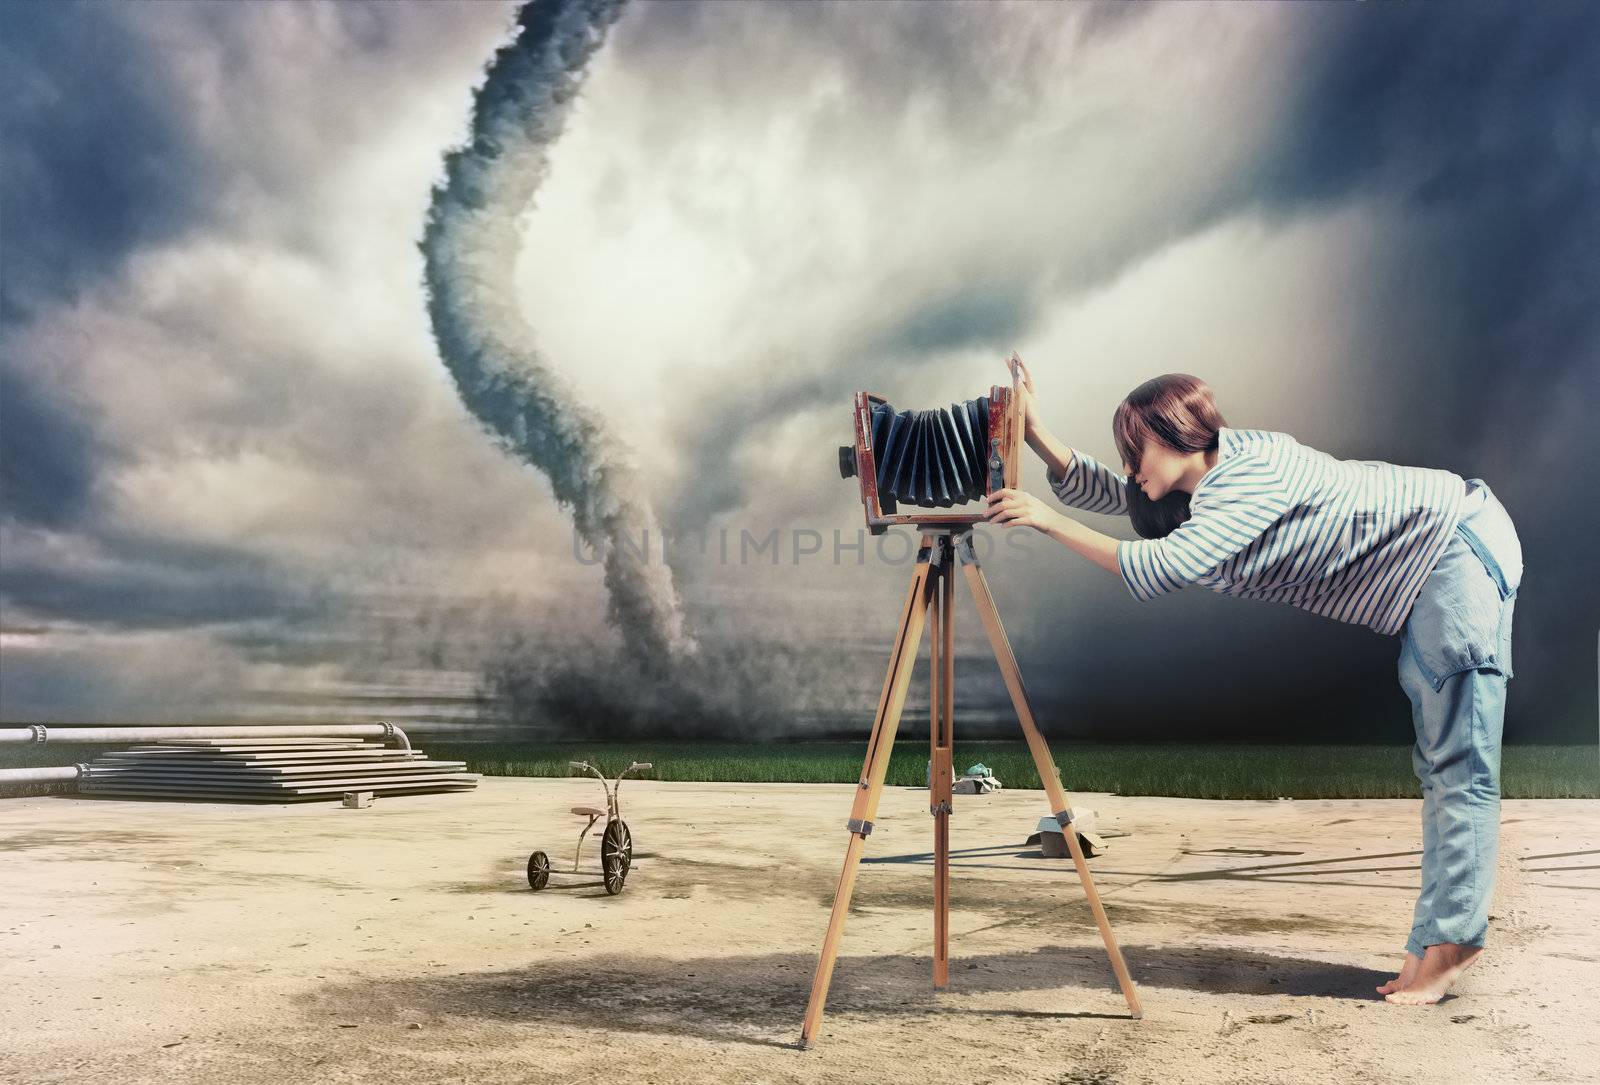 woman, taking photo by vintage camera and tornado (Photo compilation. Photo and hand-drawing elements combined. The grain and texture added.)
